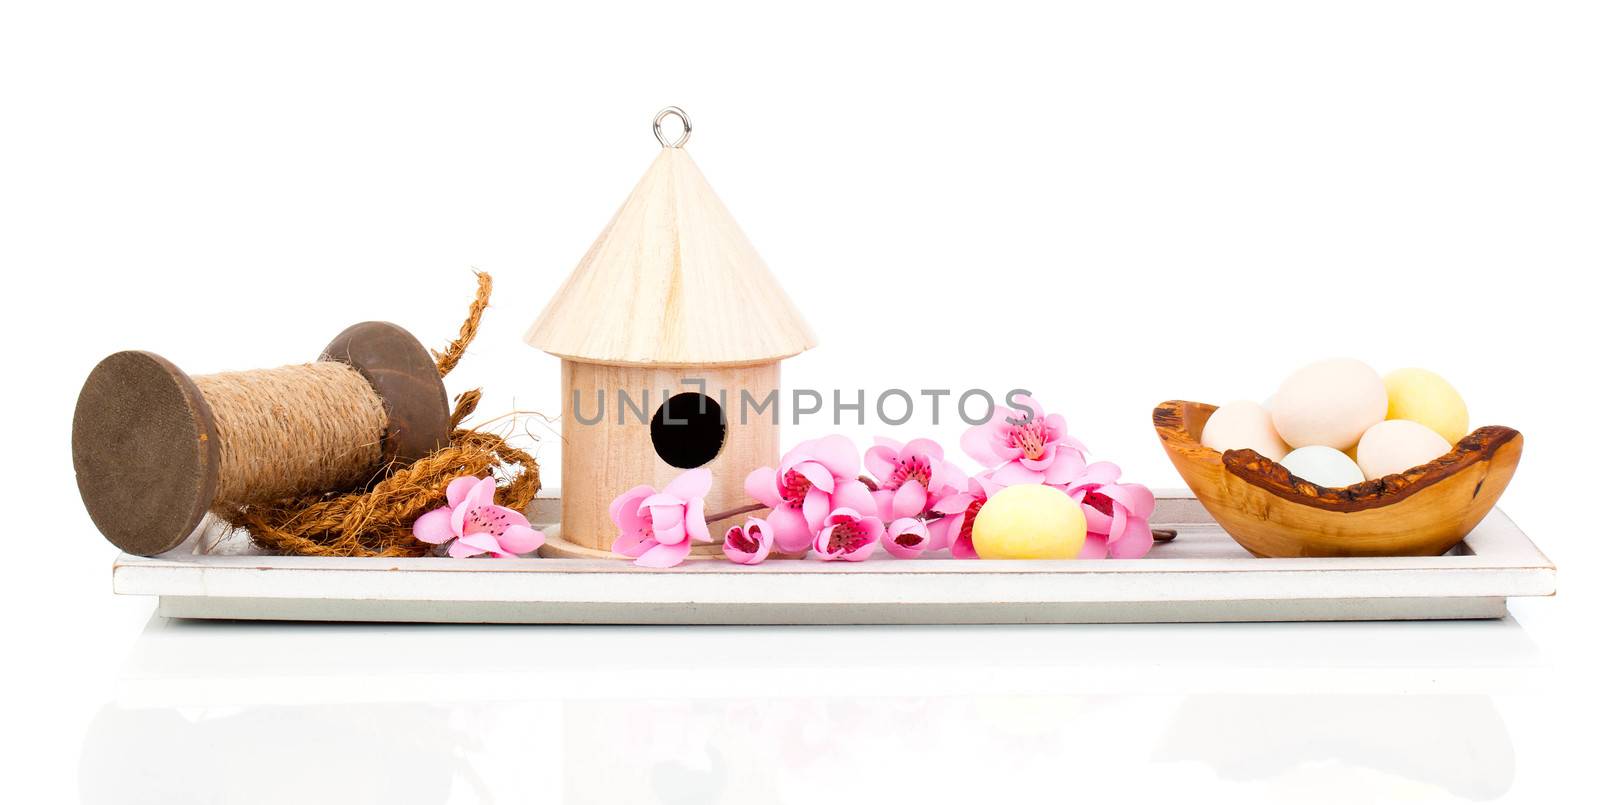 Easter eggs with birdhouse and easter decoration, isolated on white background